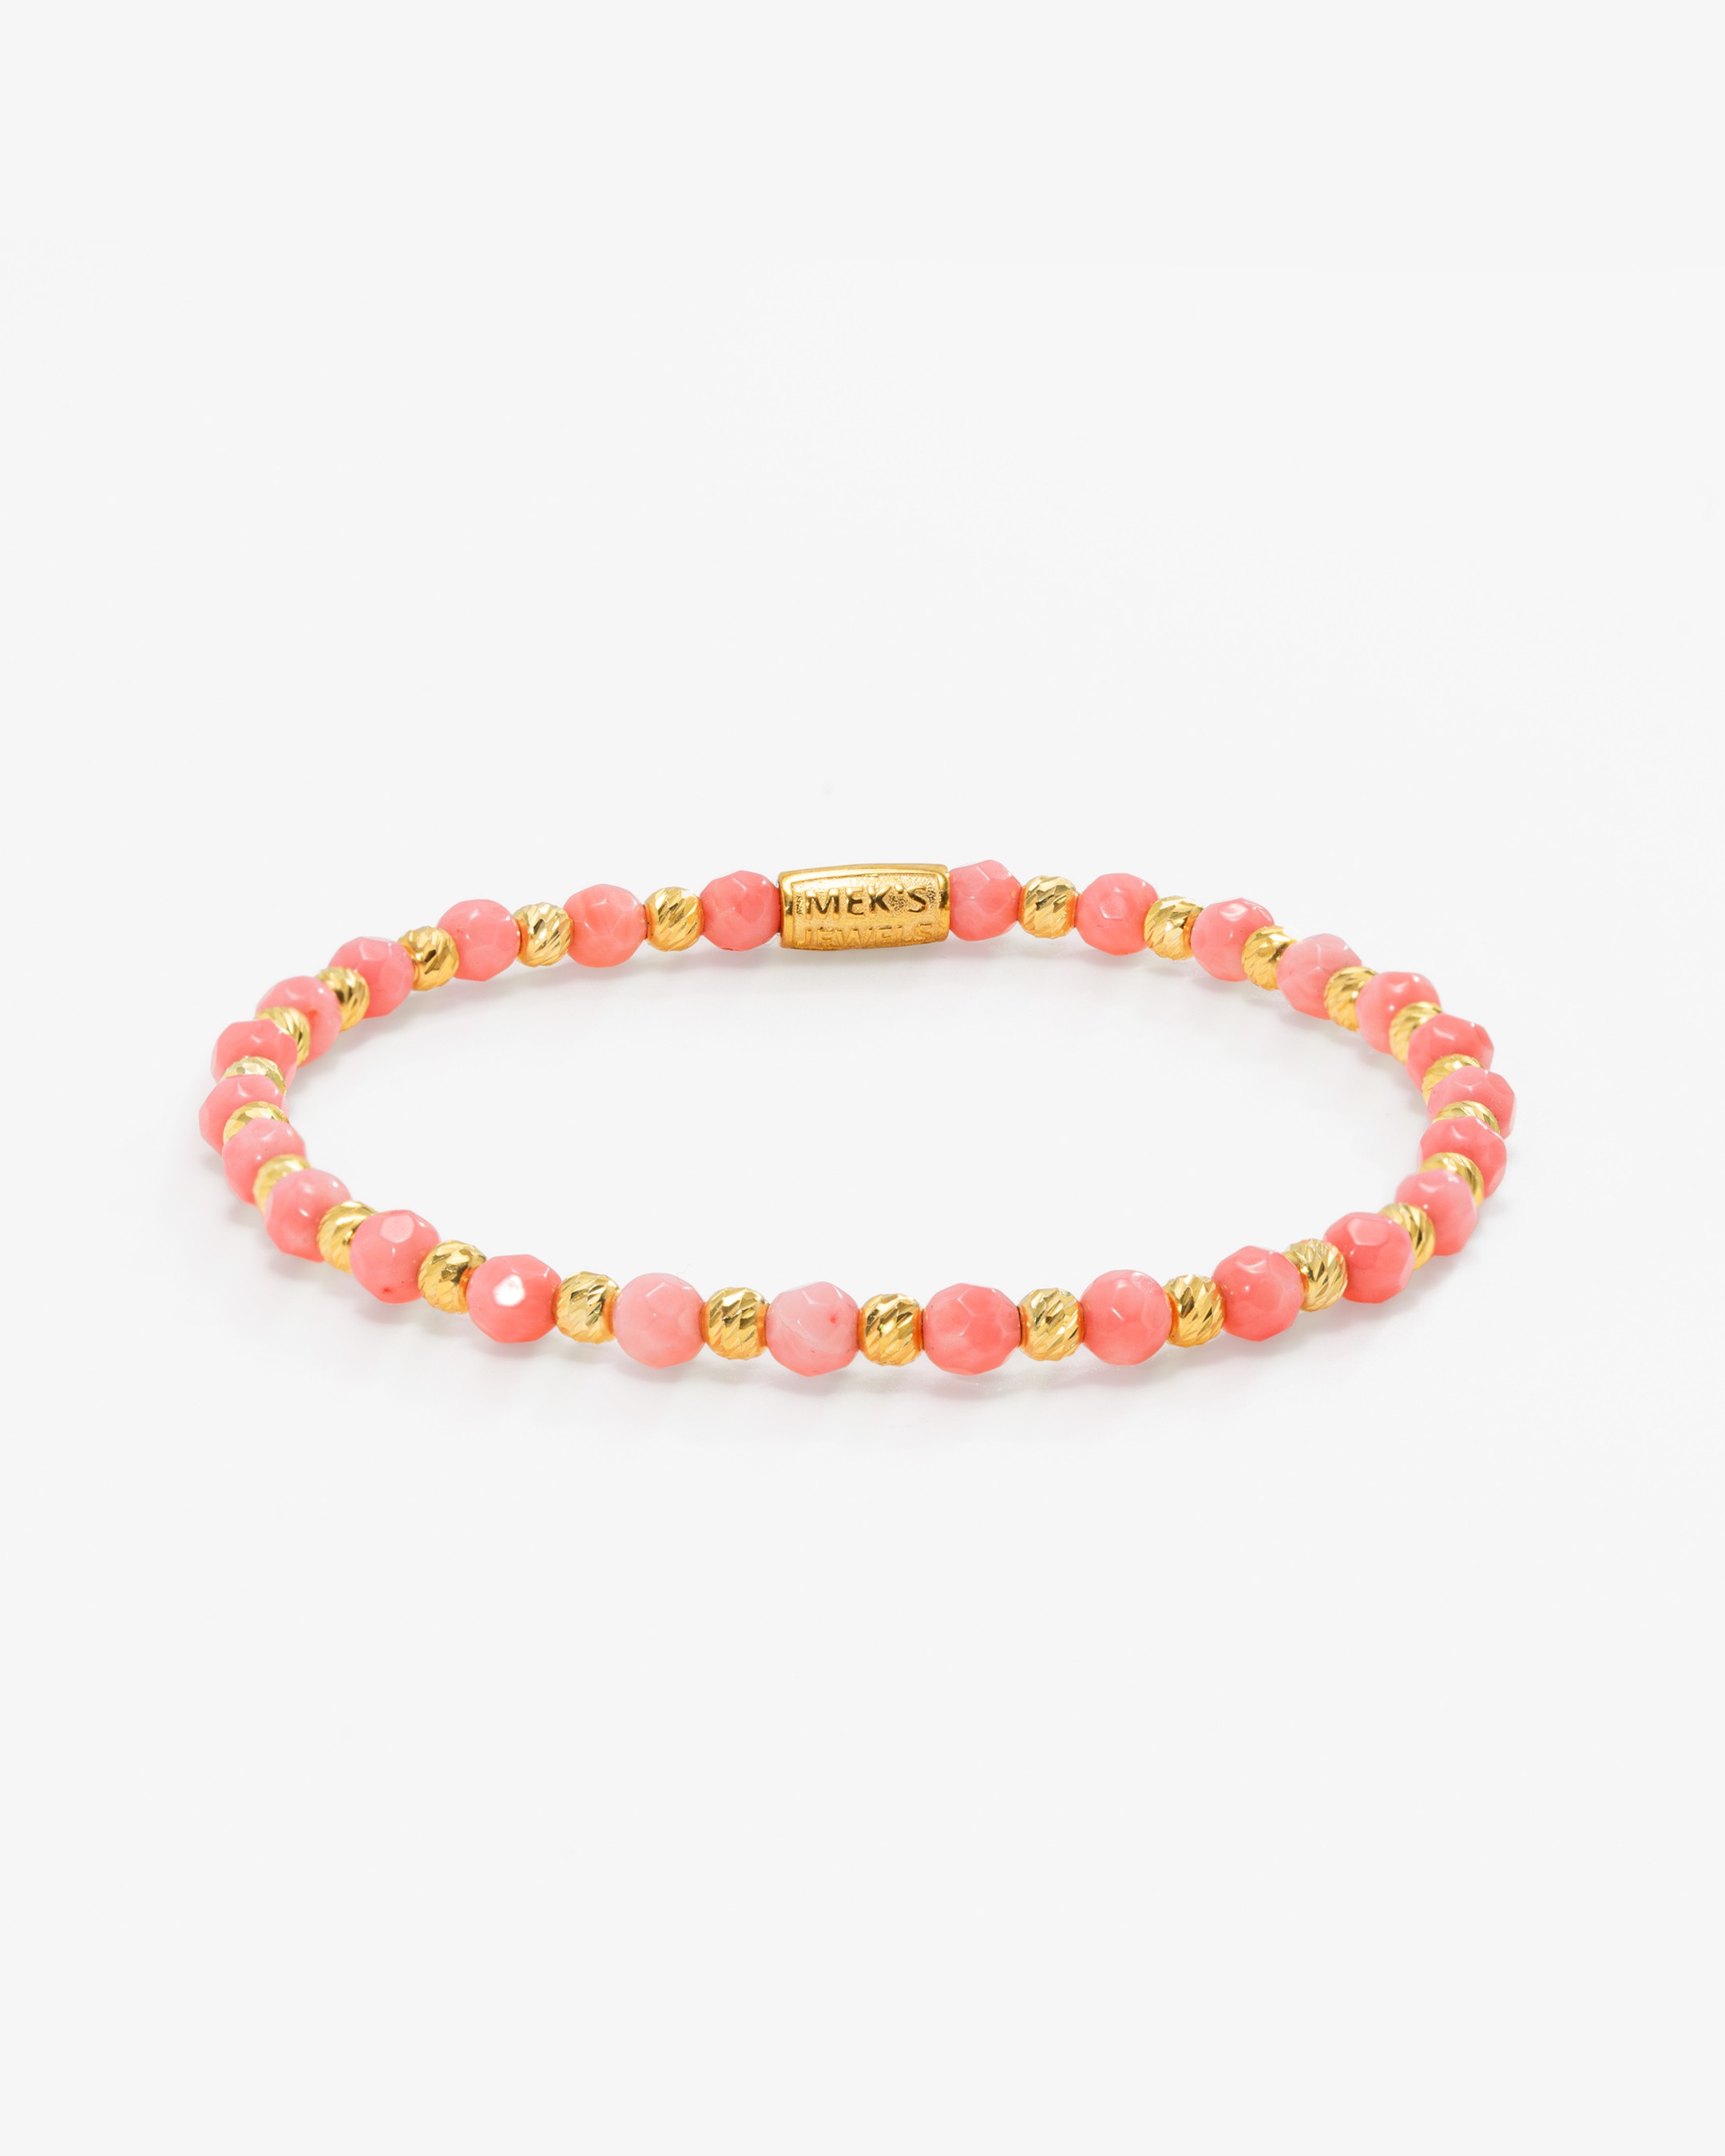 11.5 Carat Sterling Silver Bracelet with Natural Pink Coral Stone - Gold